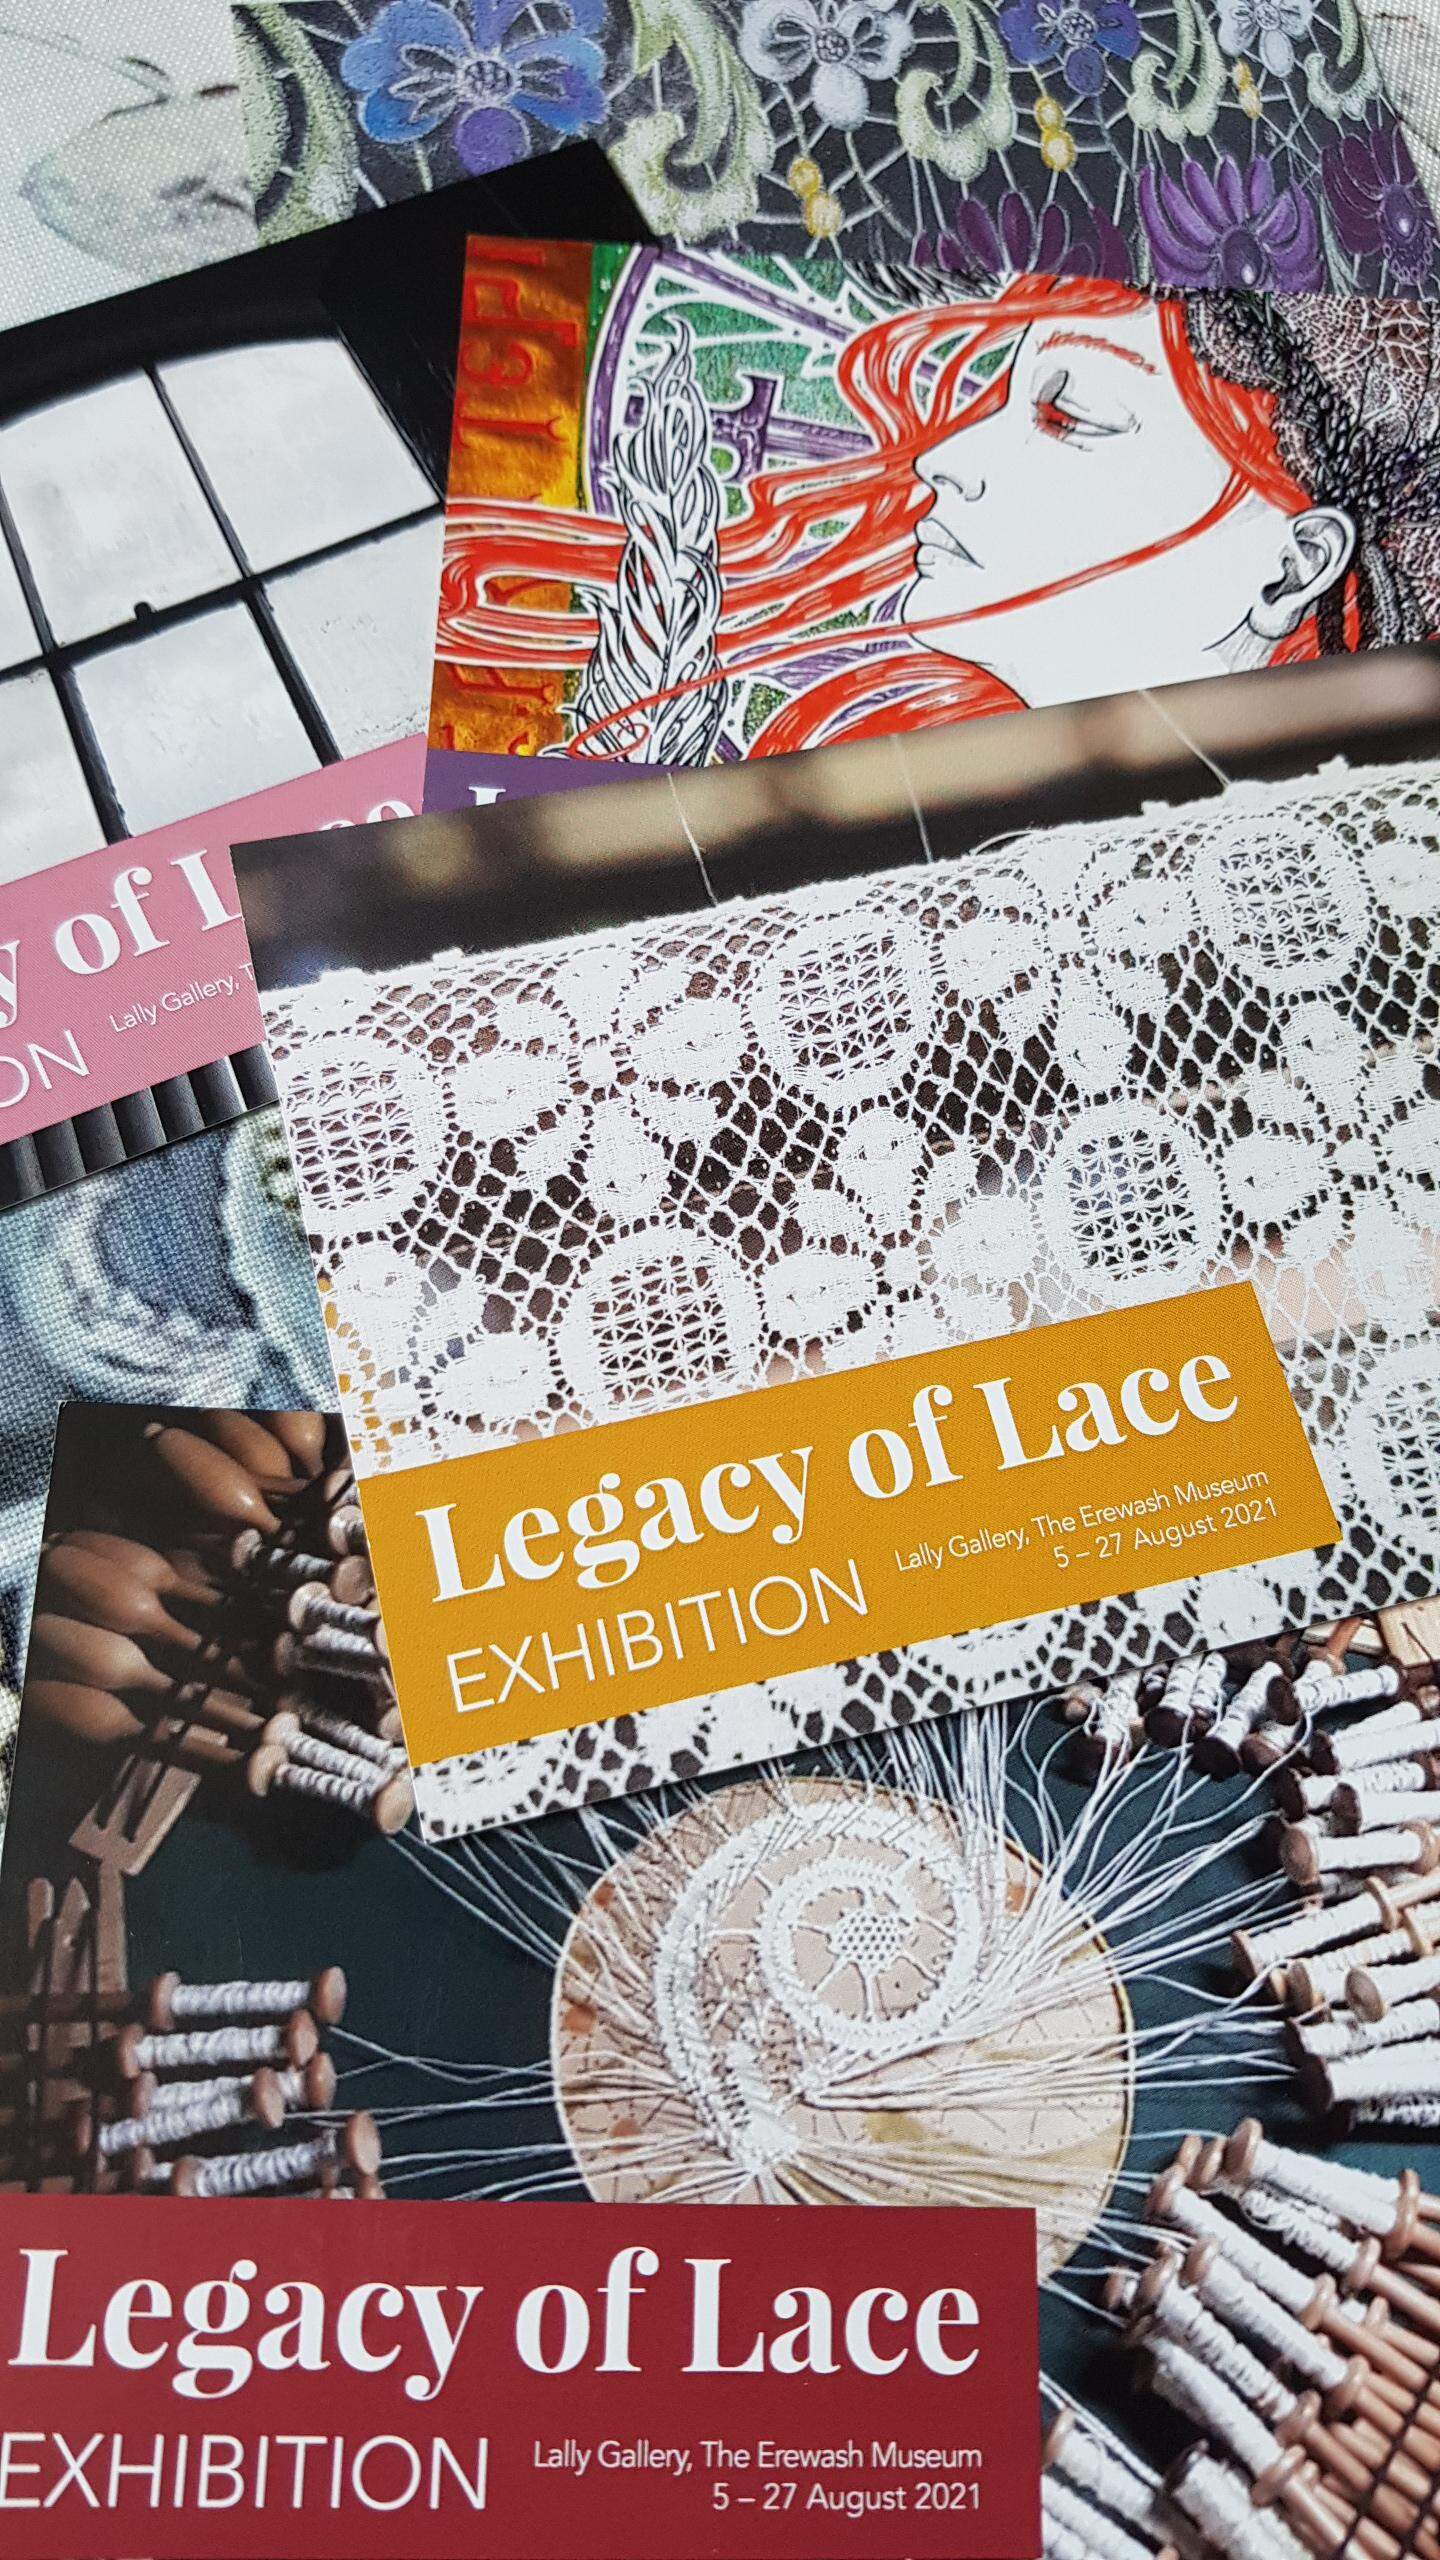 A Legacy of Lace - Victoria